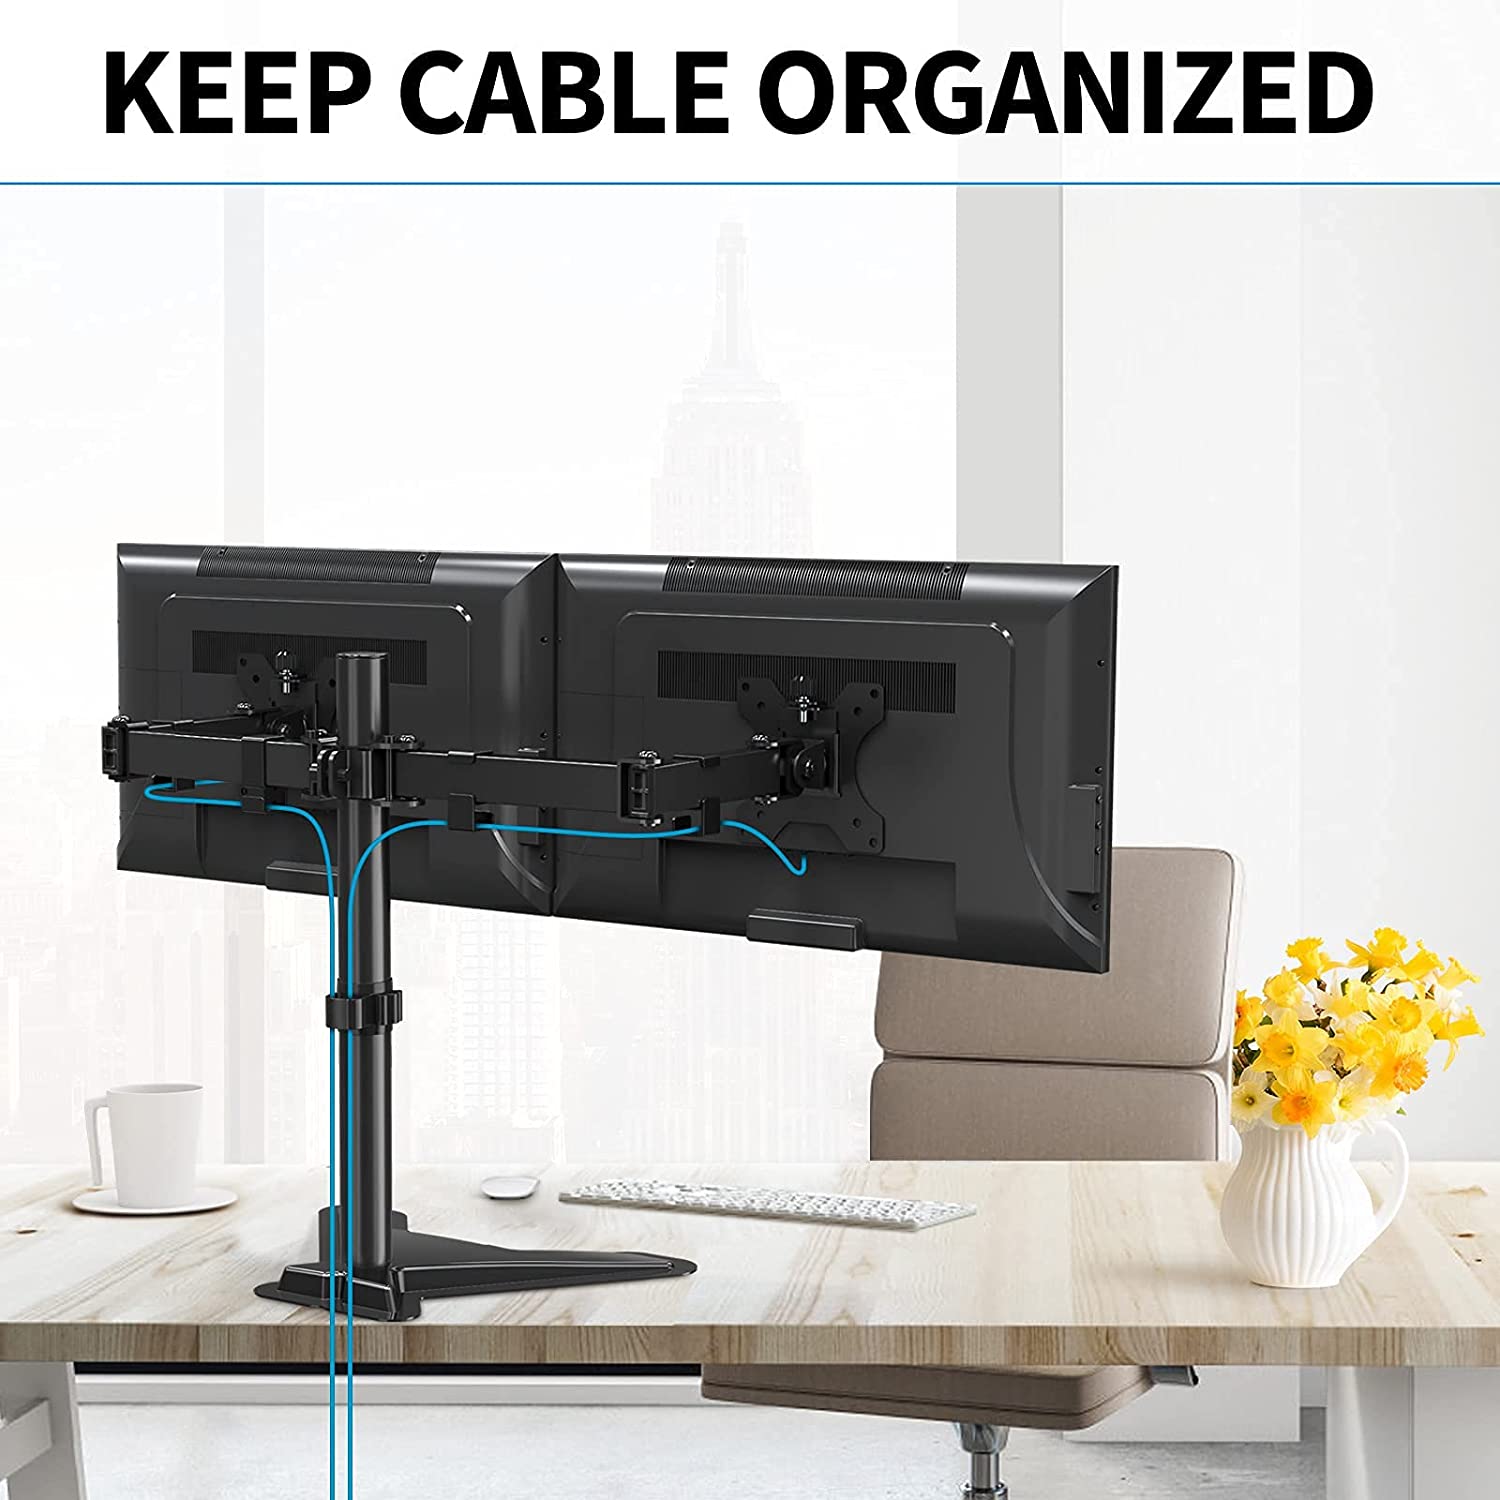 frestanding dual monitor stand keeps cable organized